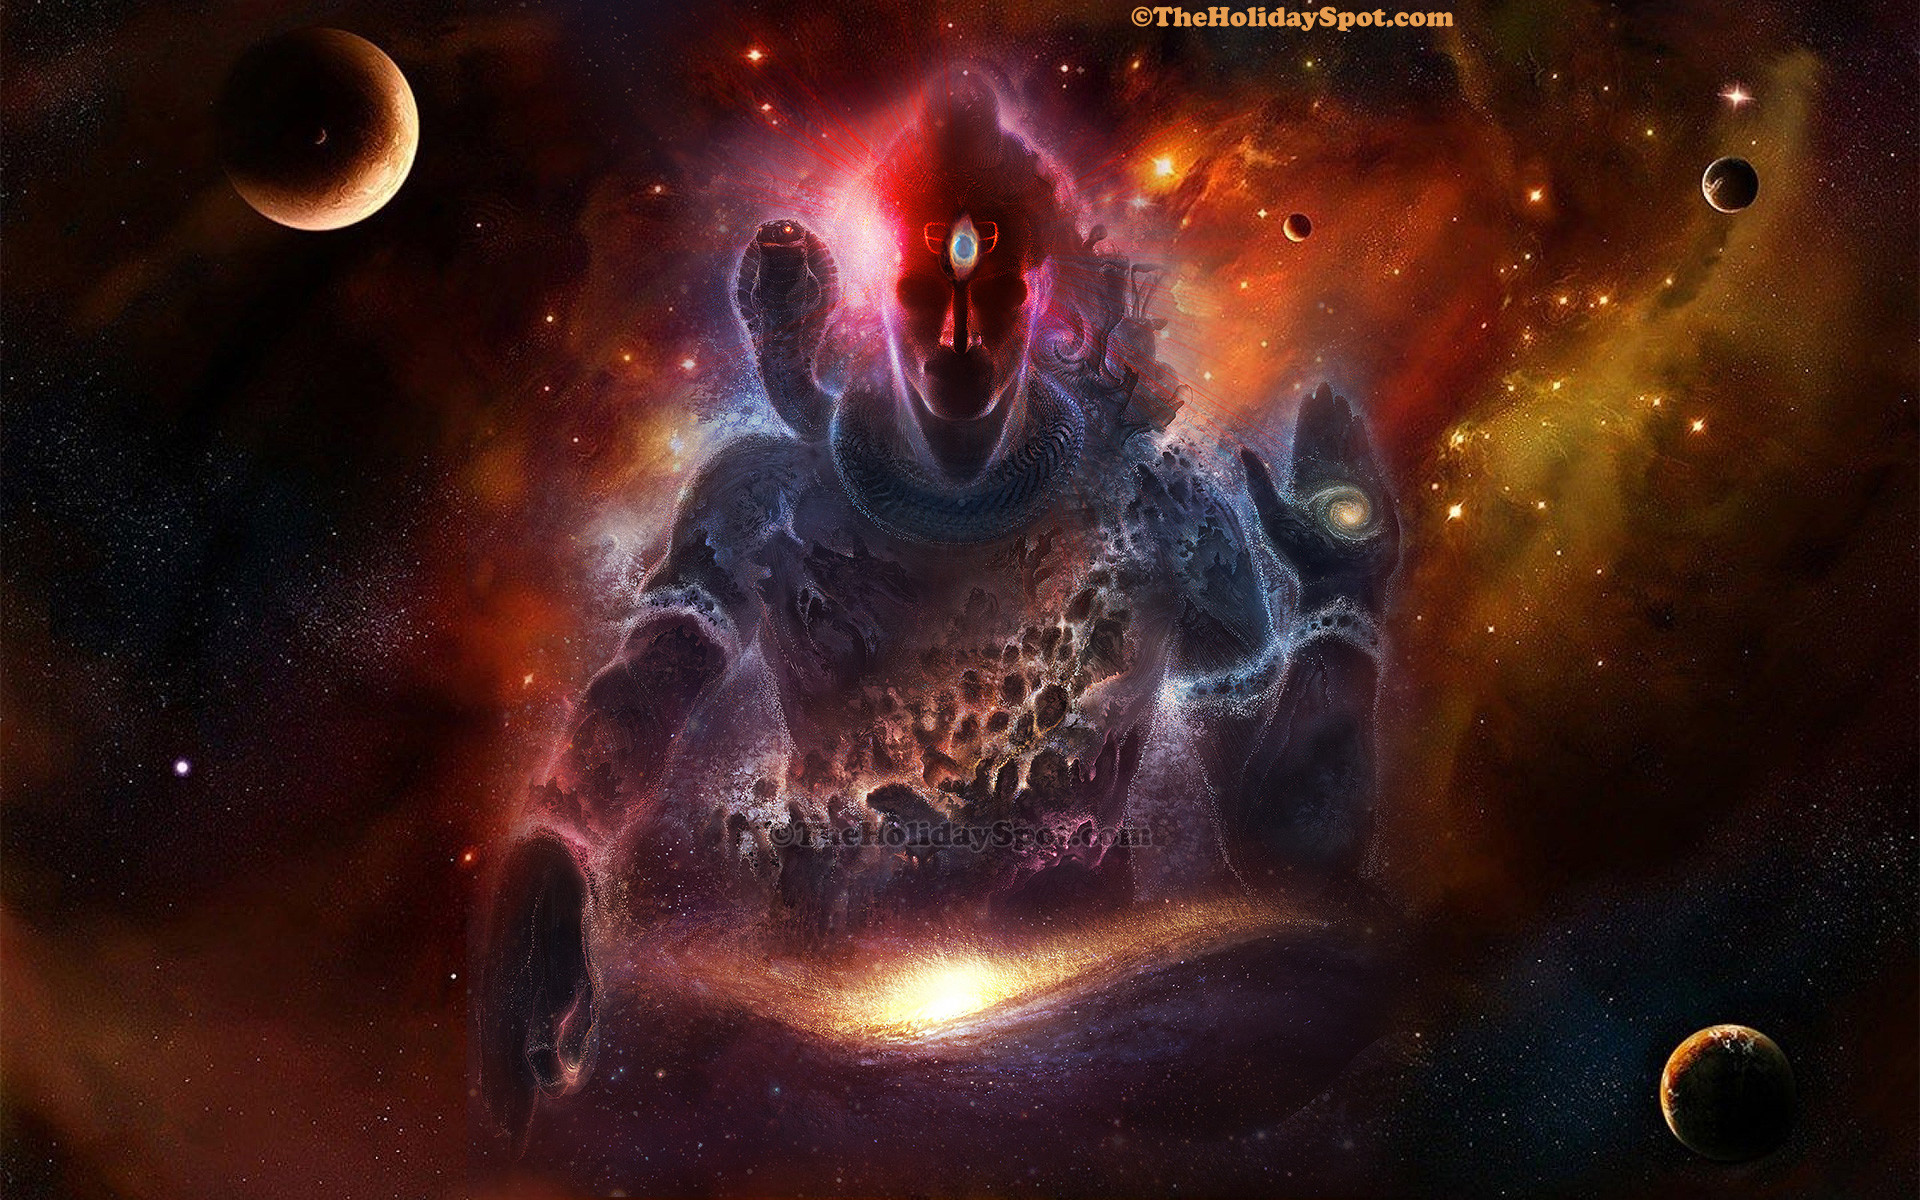 1920x1200 High definition wallpaper of Shiva The Lord of Destruction.